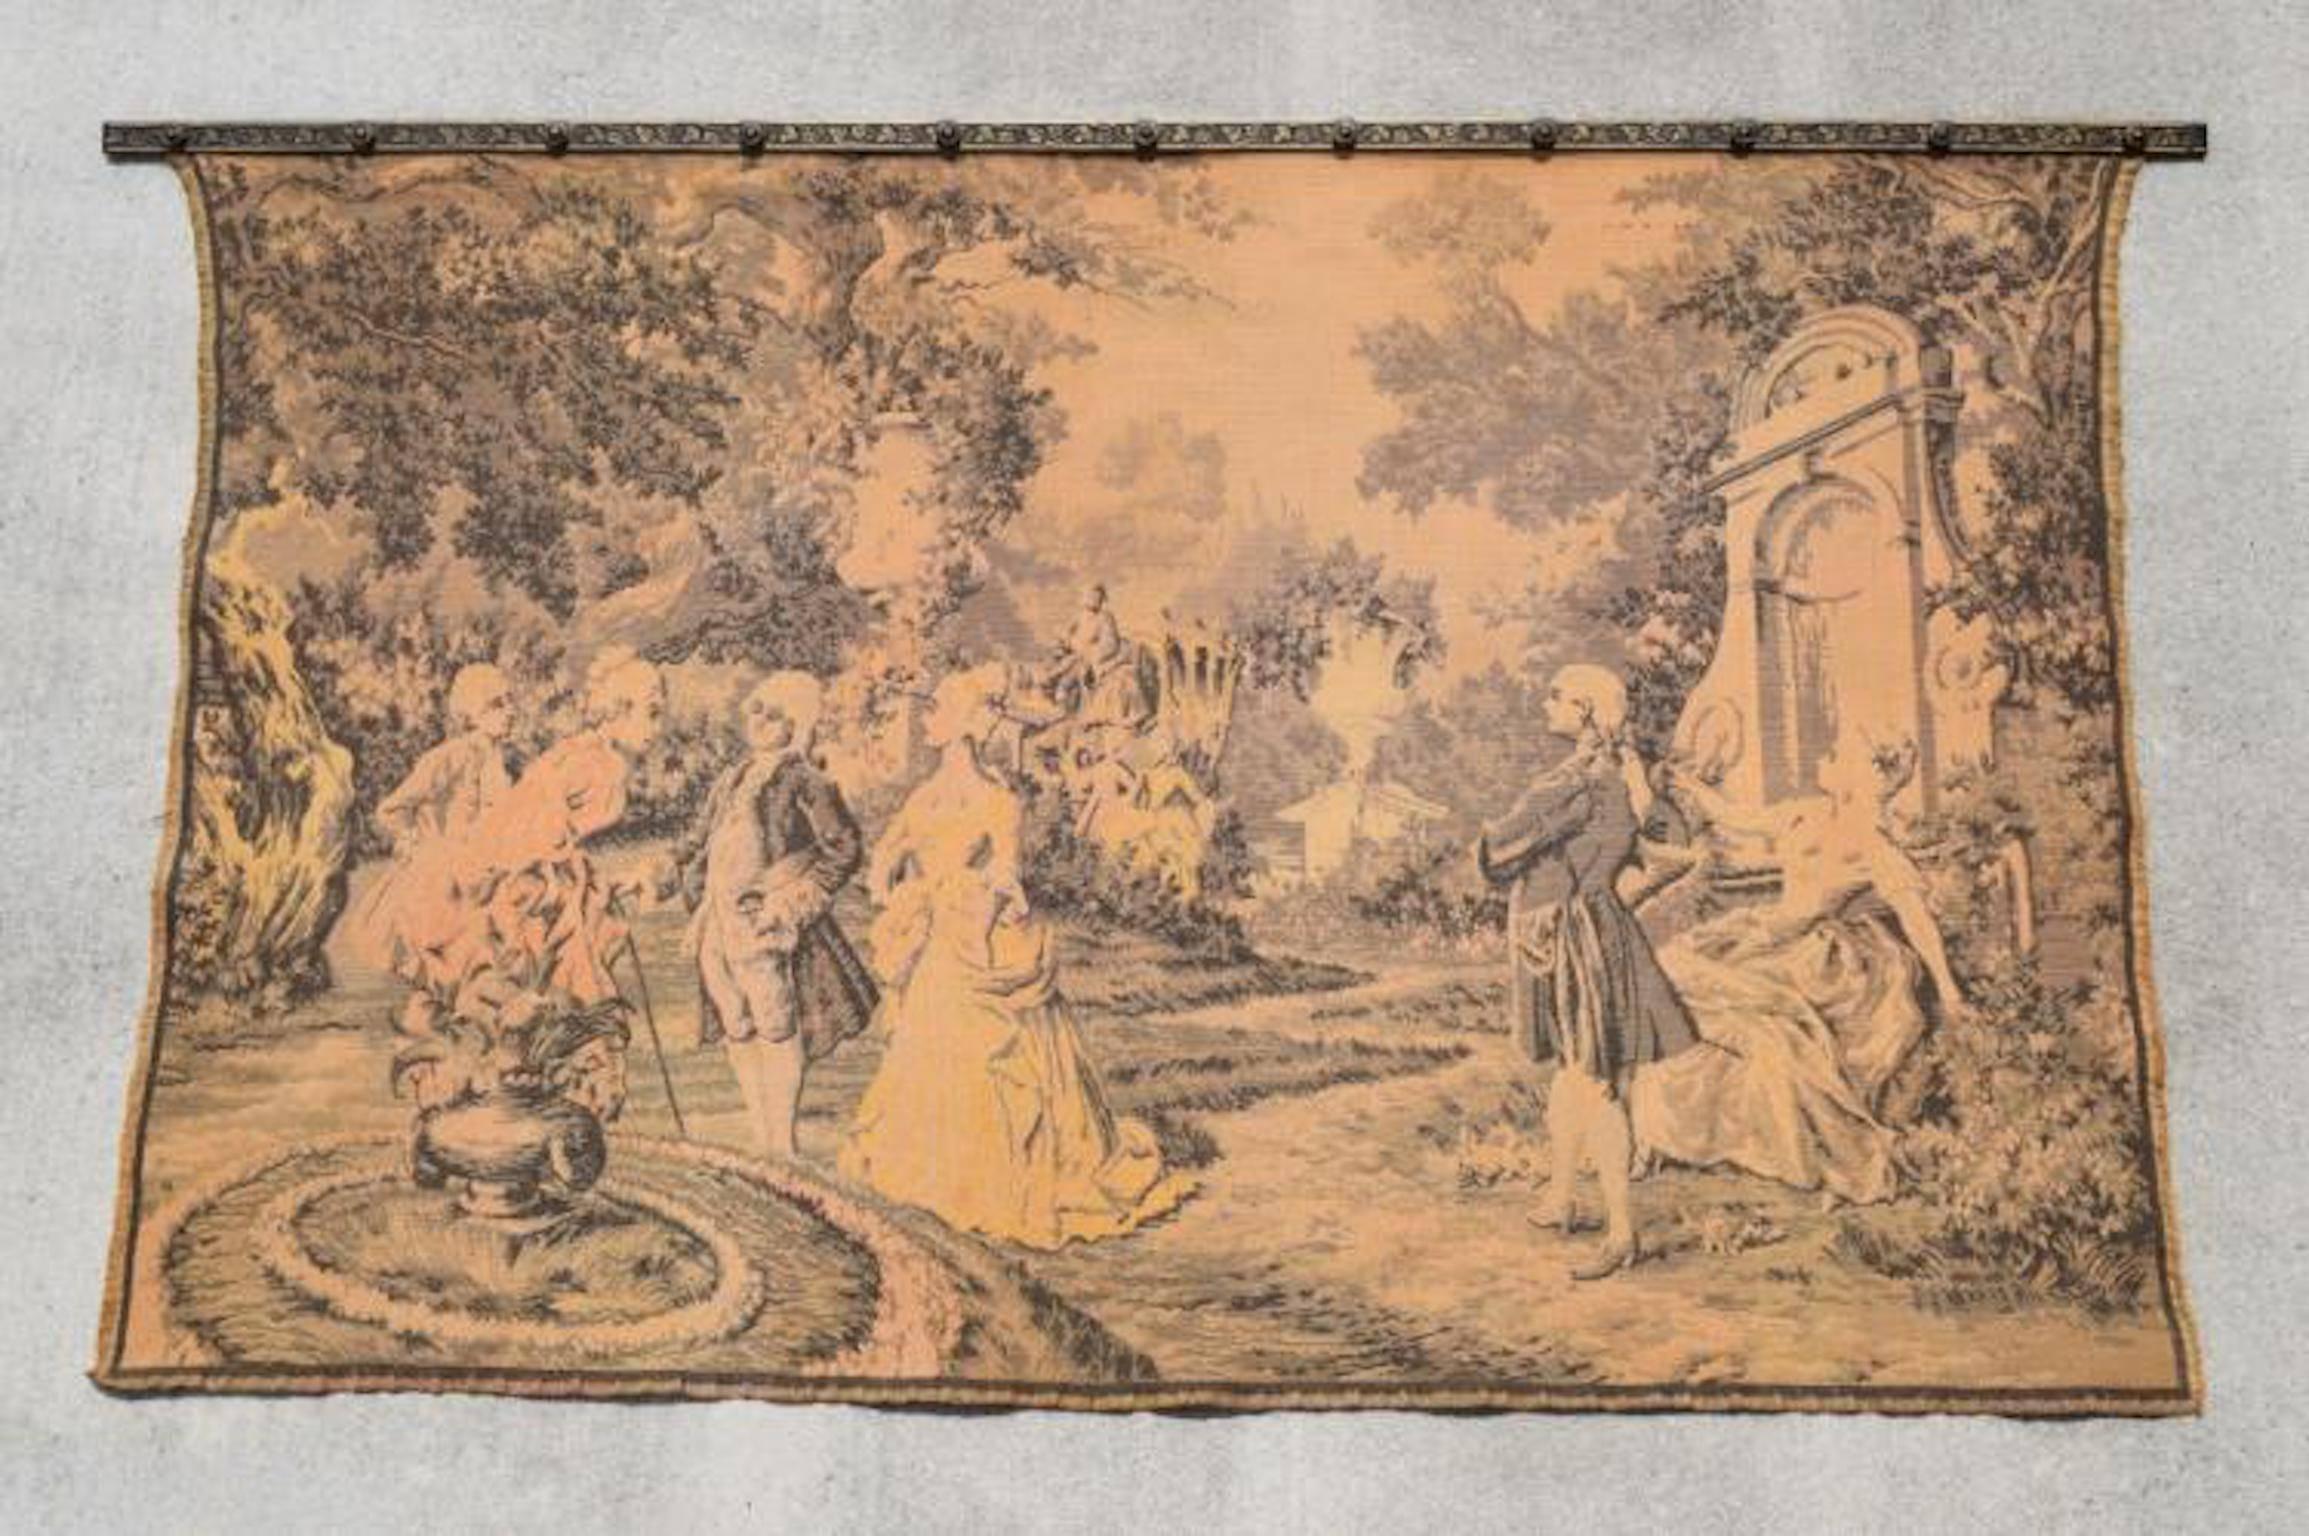 19th century French Rococo Revival tapestry textile
Scene of people in a garden.